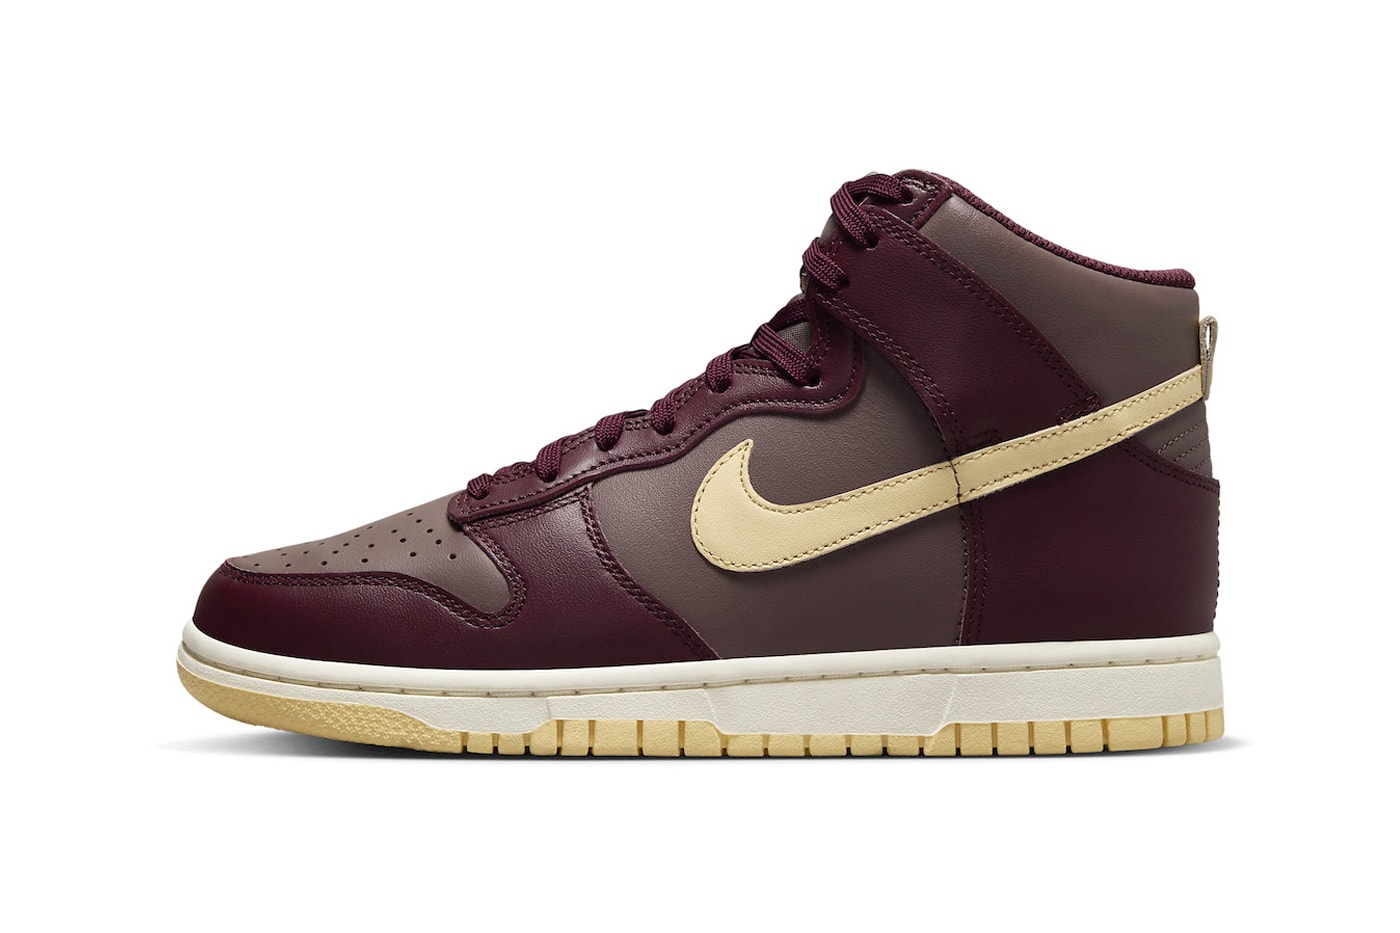 Official Look at the Nike Dunk High "Plum Eclipse" DD1869-202 Plum Eclipse/Pale Vanilla-Night Maroon high top basketball shoes swoosh